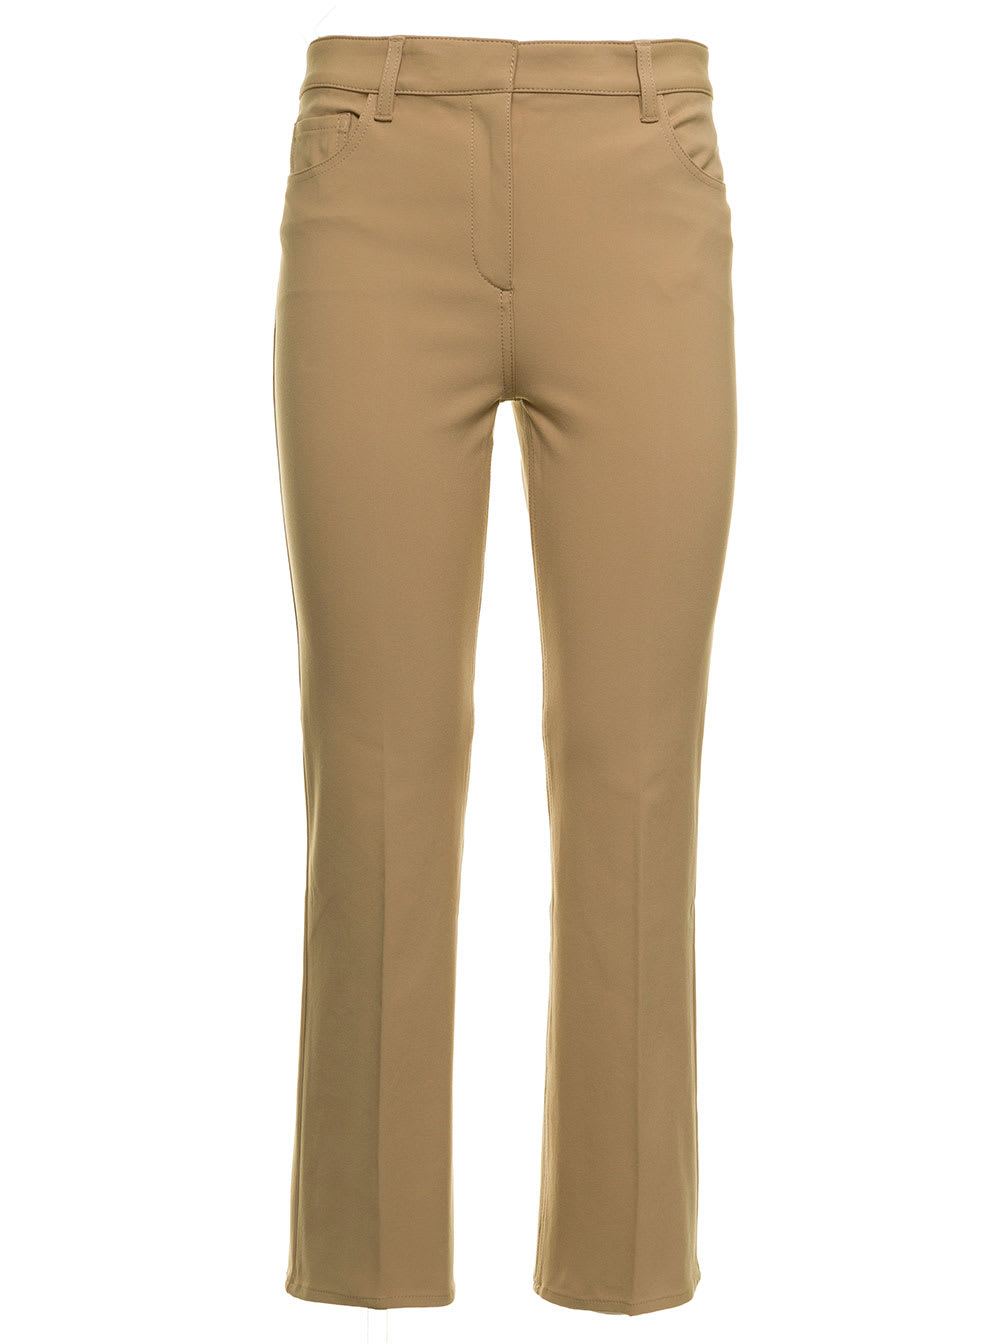 Theory Womans Beige Cotton Blend Trousers